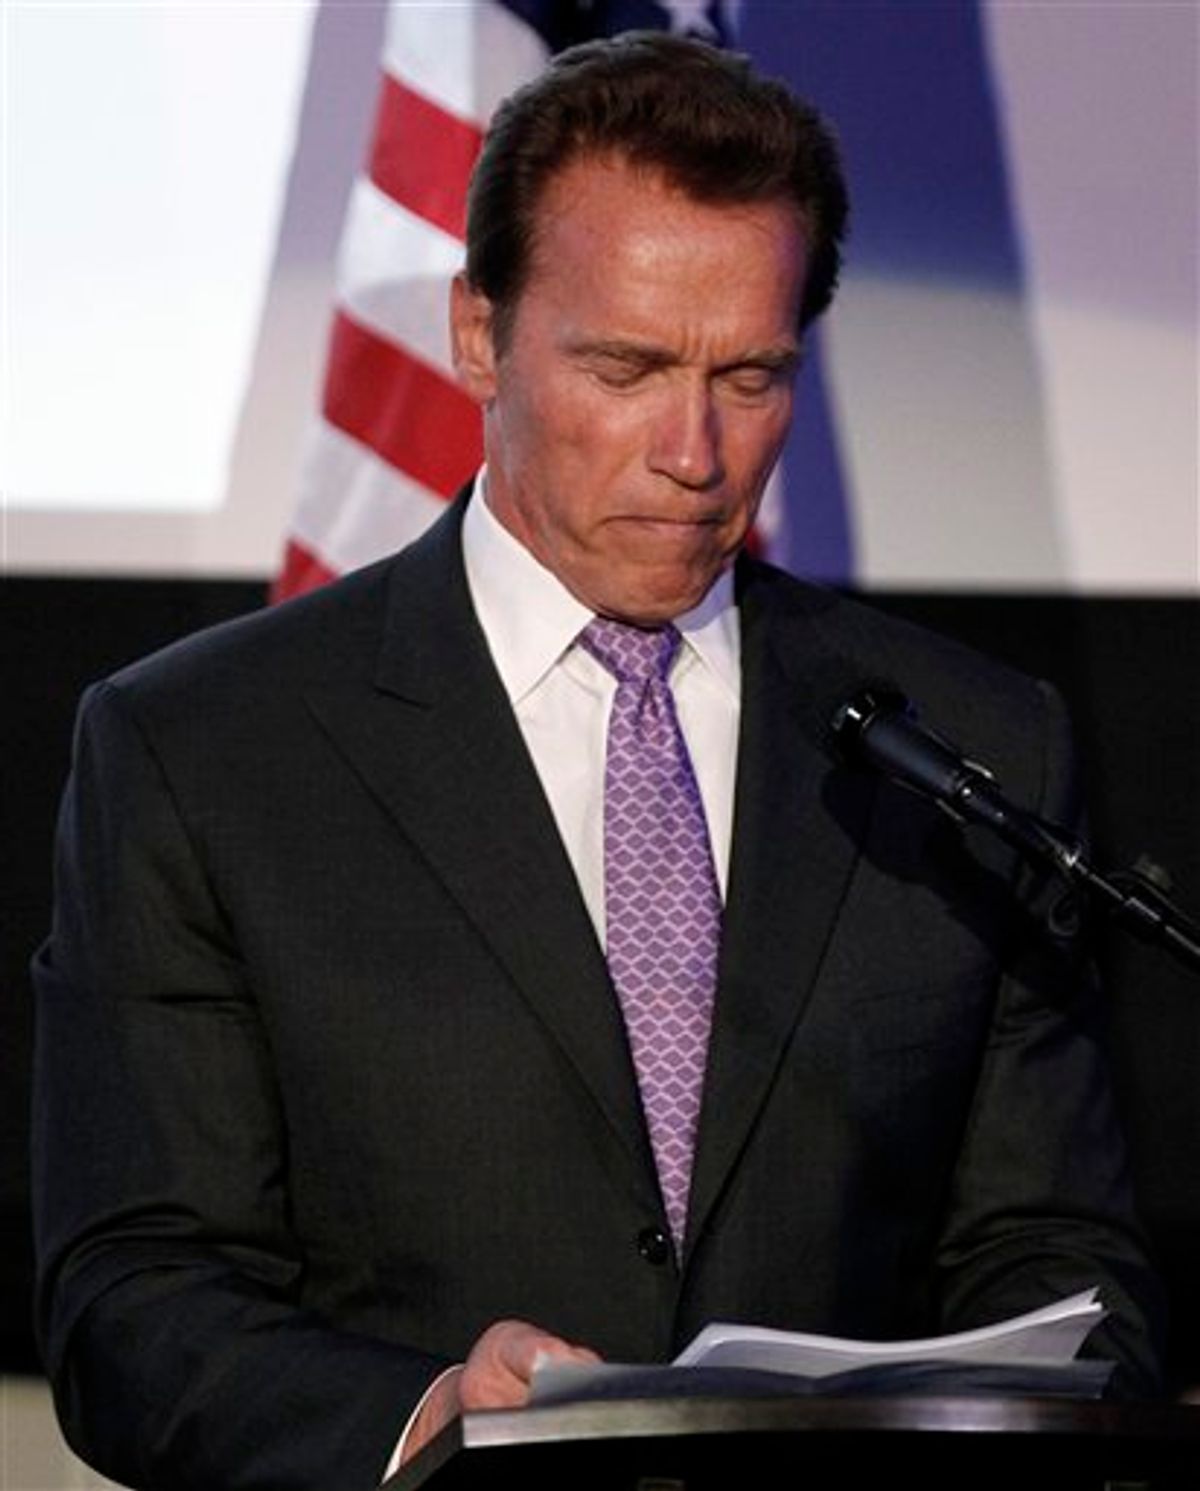 Arnold Schwarzenegger speaks at the Israel 63rd Independence Day Celebration hosted by the Consulate General of Israel in Los Angeles, Tuesday, May 10, 2011. Schwarzenegger was honored at the event. (AP Photo/Matt Sayles) (AP)